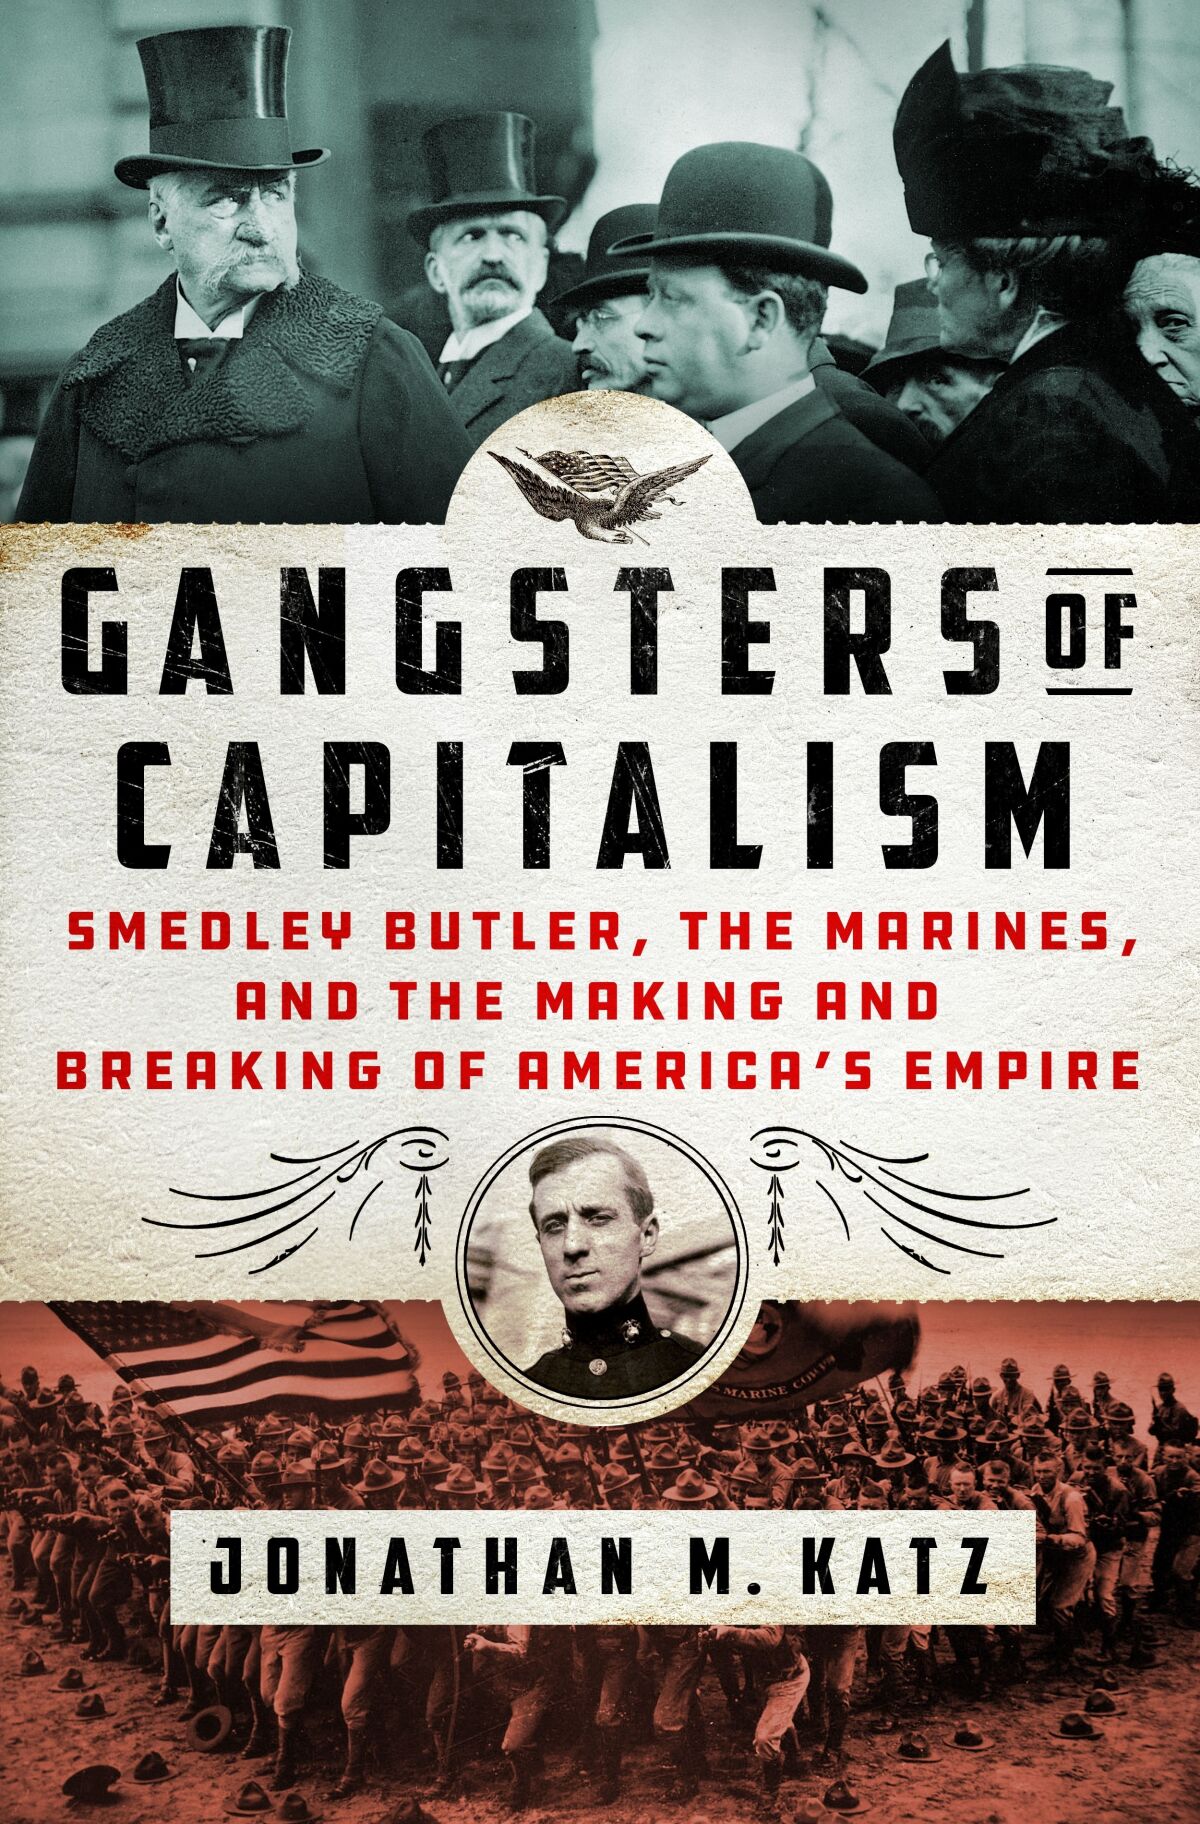 This cover image released by St. Martin's Press shows "Gangsters of Capitalism: Smedley Butler, the Marines, and the Making and Breaking of America's Empire" by Jonathan M. Katz. (St. Martin's Press via AP)